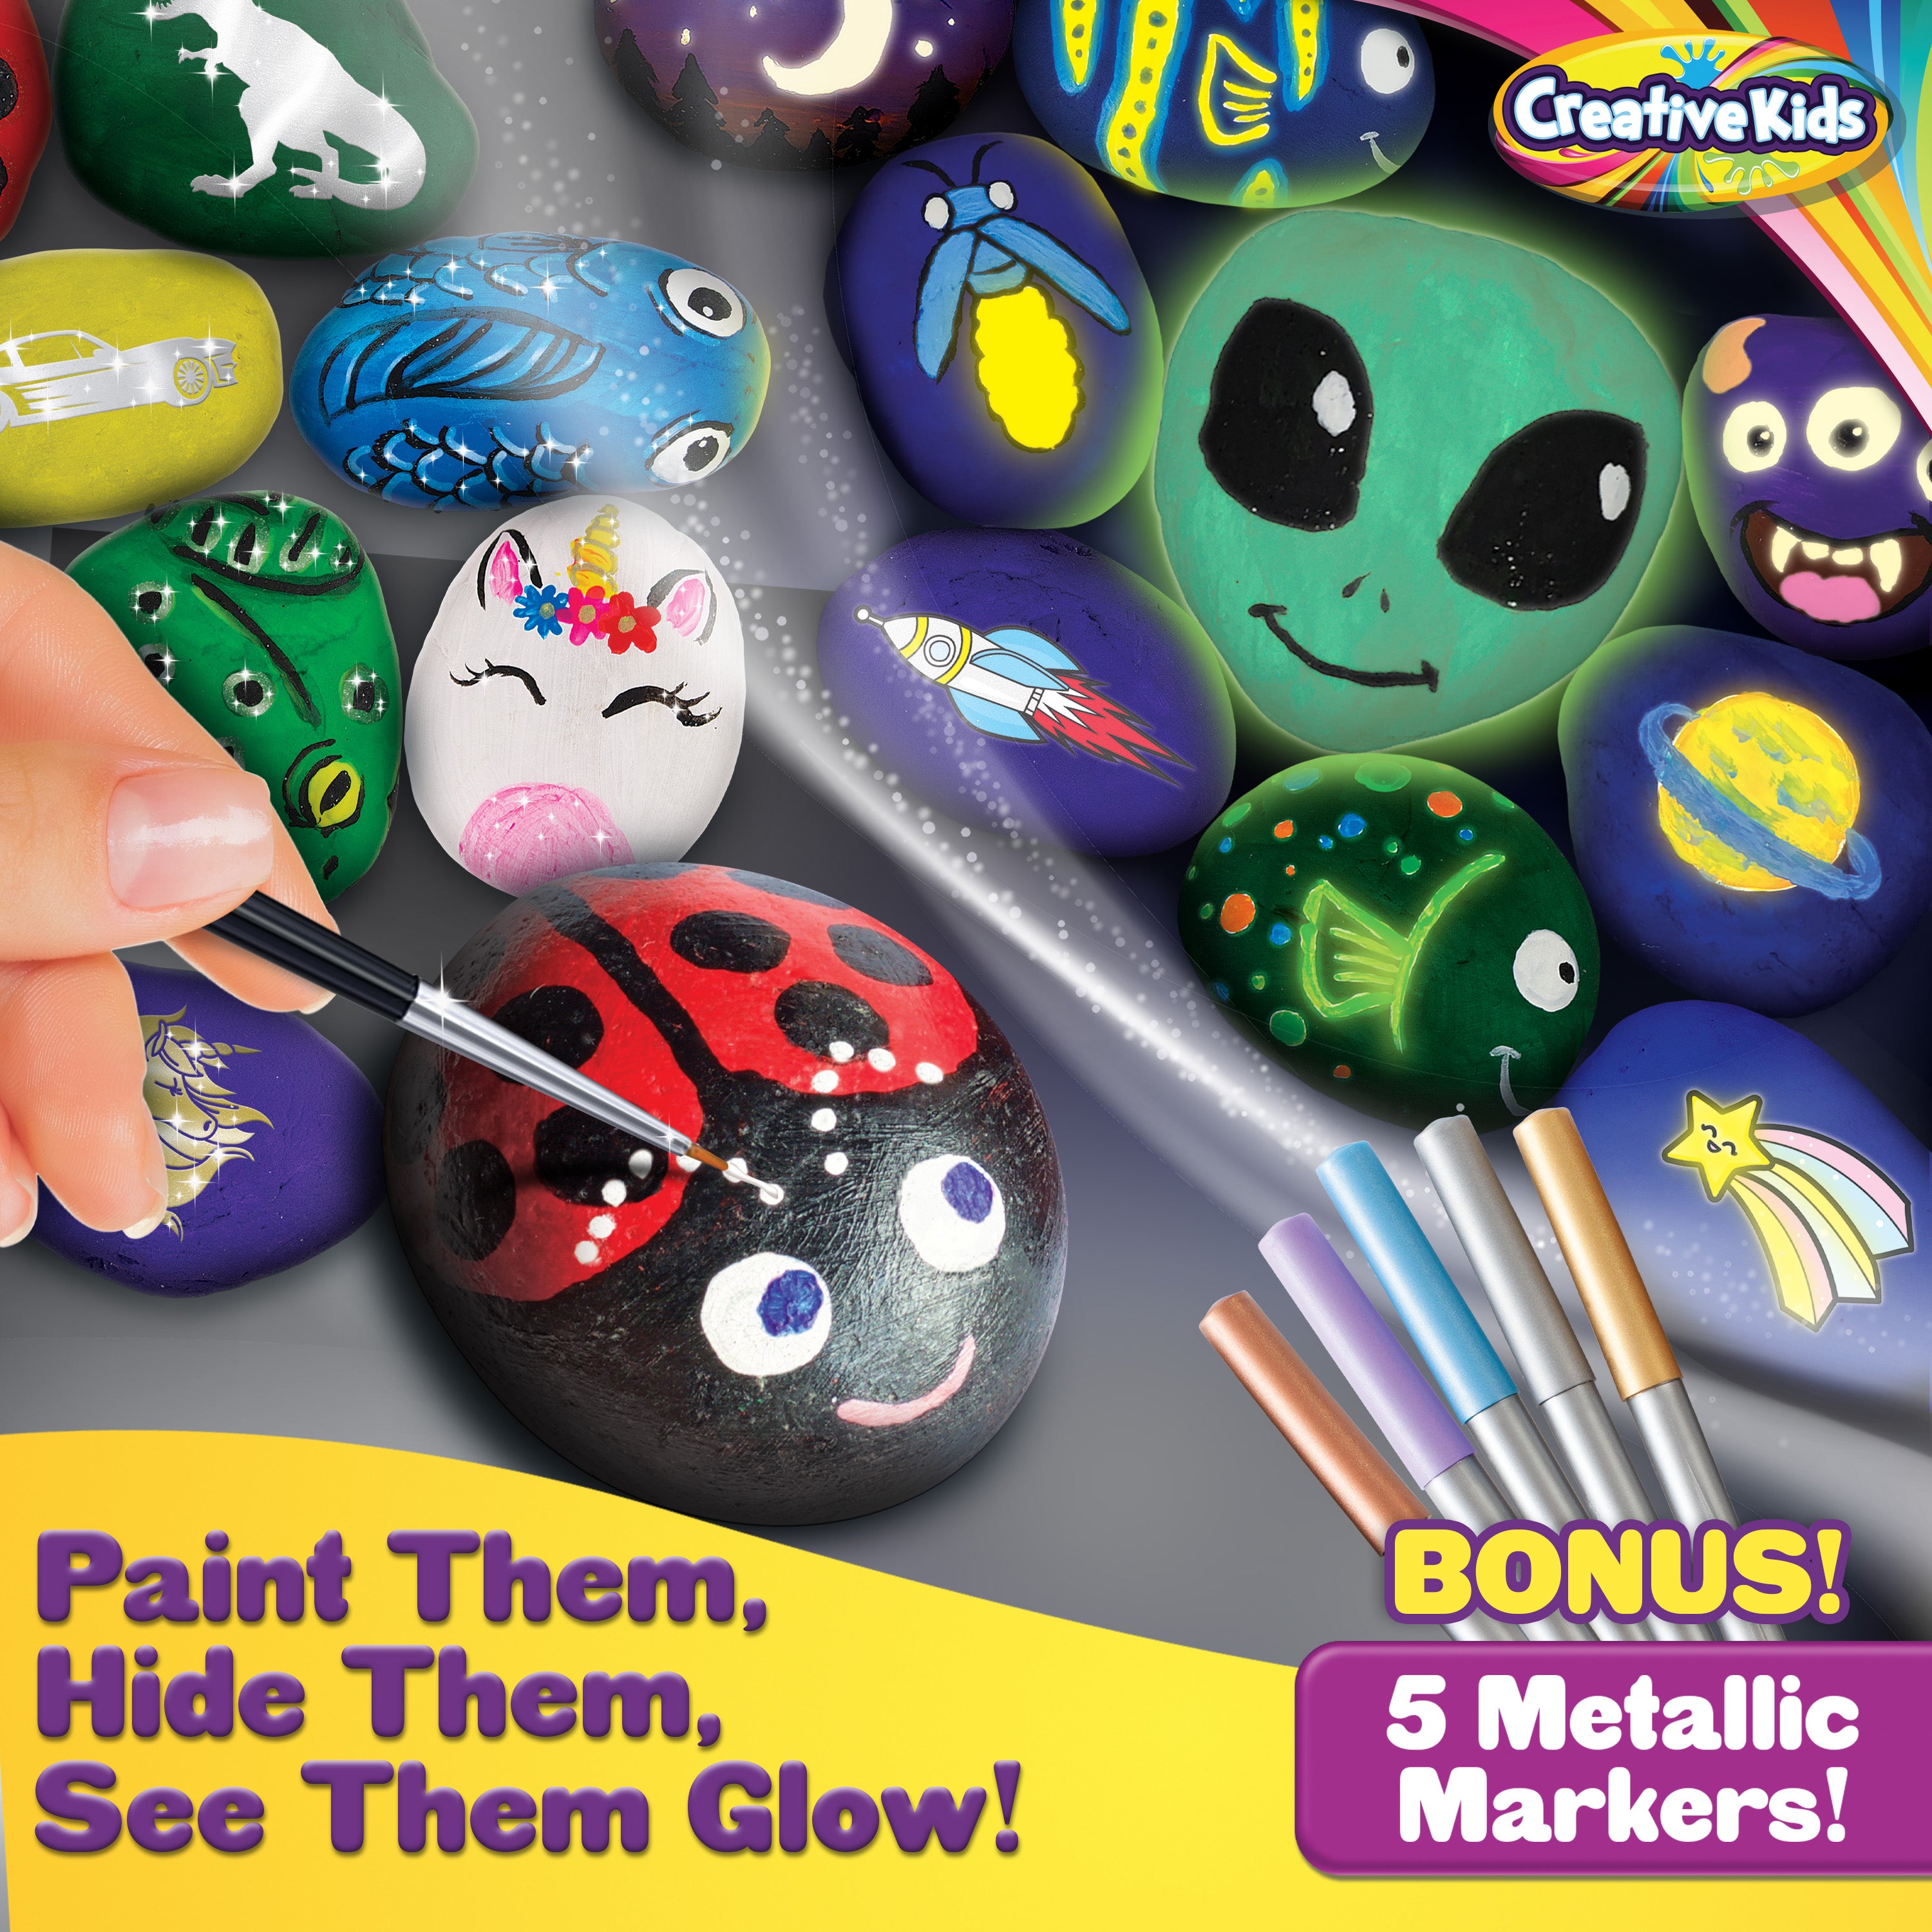 Creativity for Kids Glow in the Dark Rock Painting Kit: Crafts for Kids  Ages 4-8+, Painting Rocks Arts and Crafts, Kids Gift